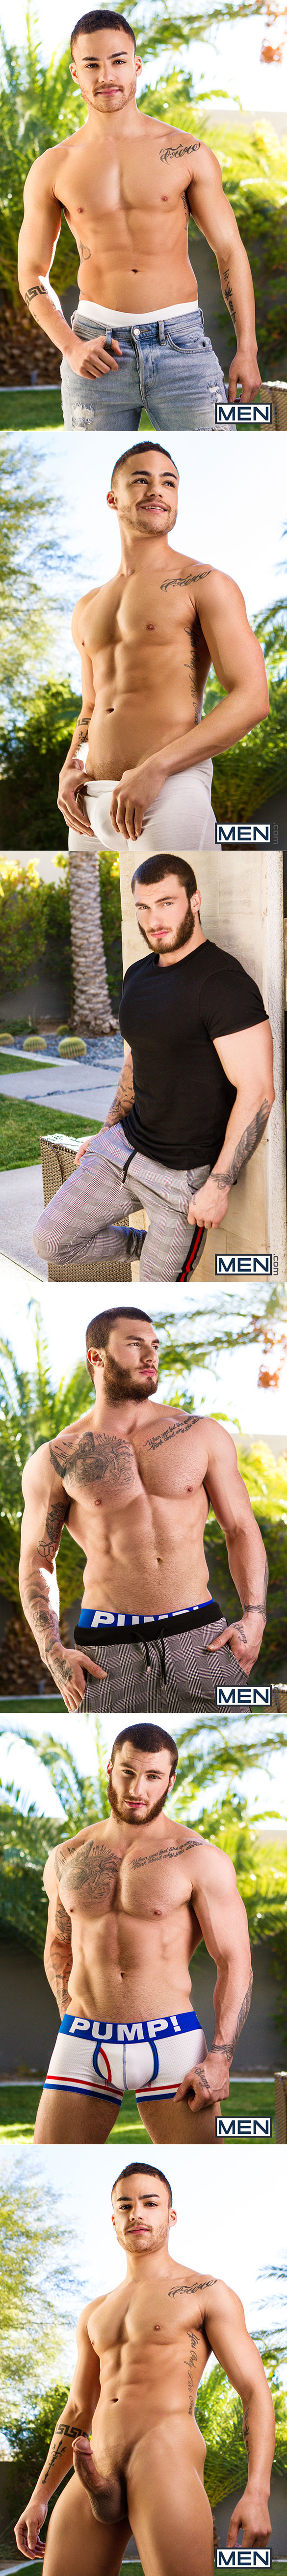 Men.com: William Seed pounds Beaux Banks in "Girls Night, Part 1"